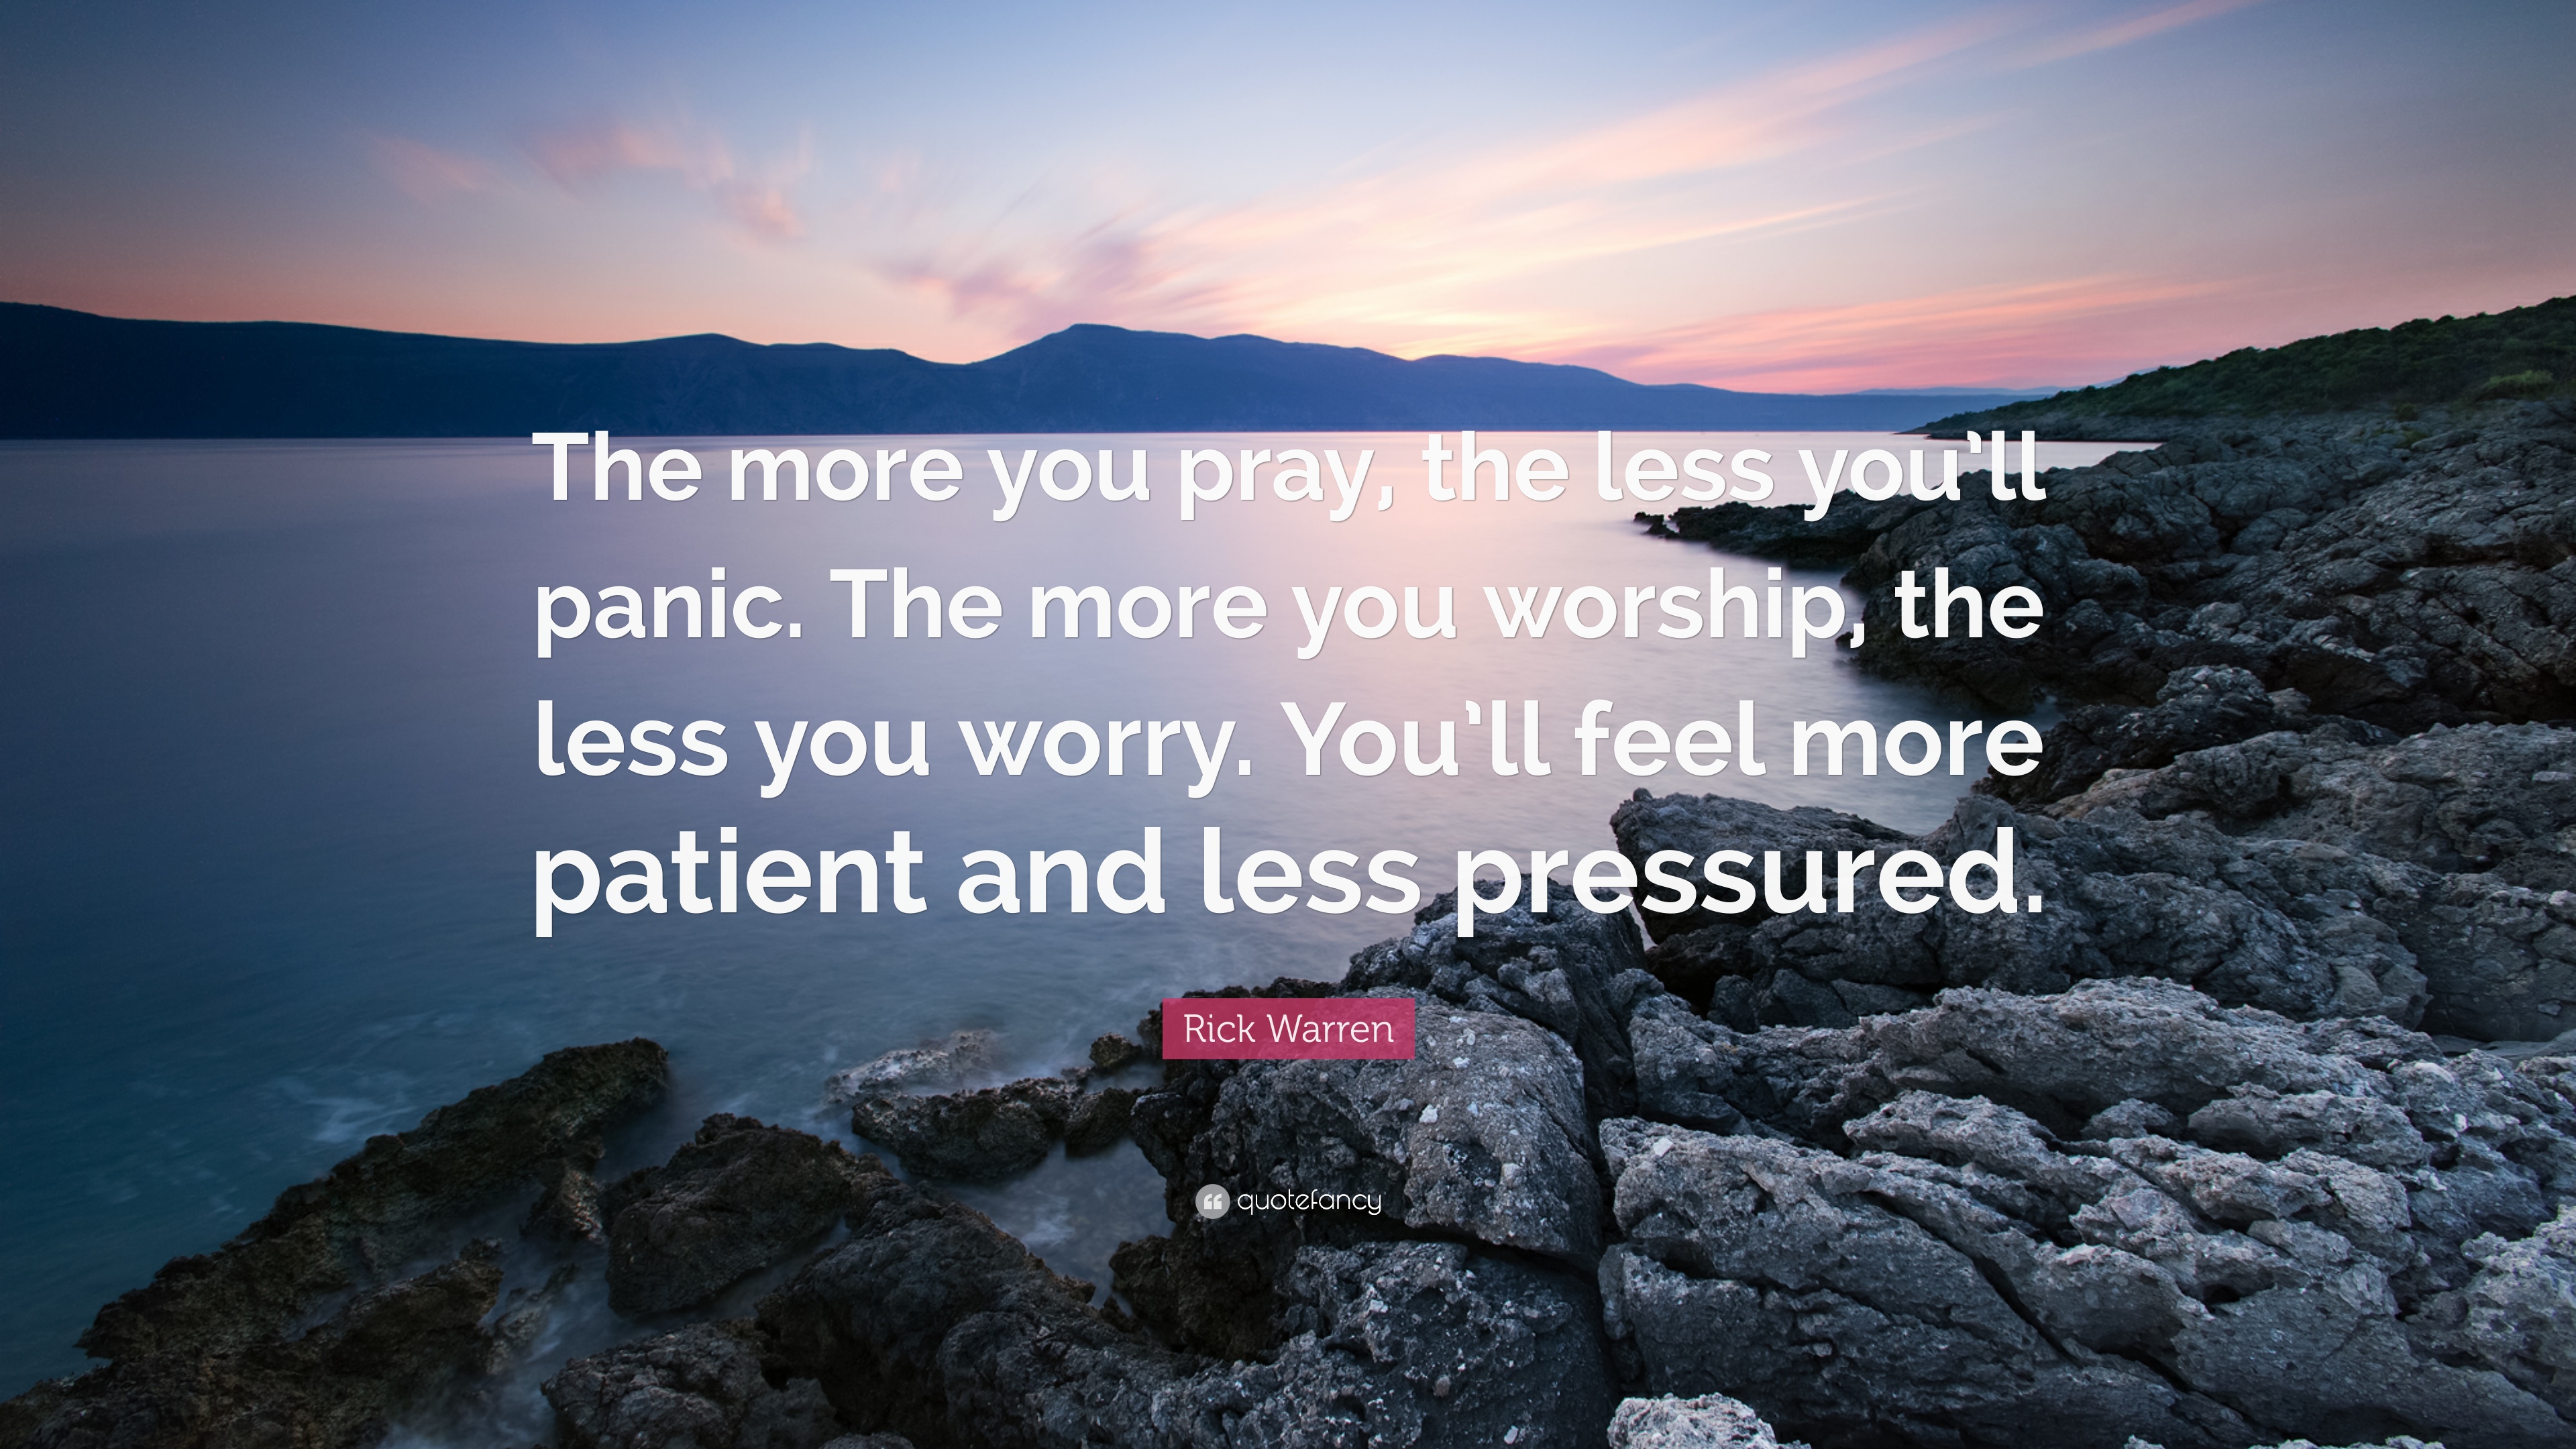 Rick Warren Quote: “The more you pray, the less you'll panic